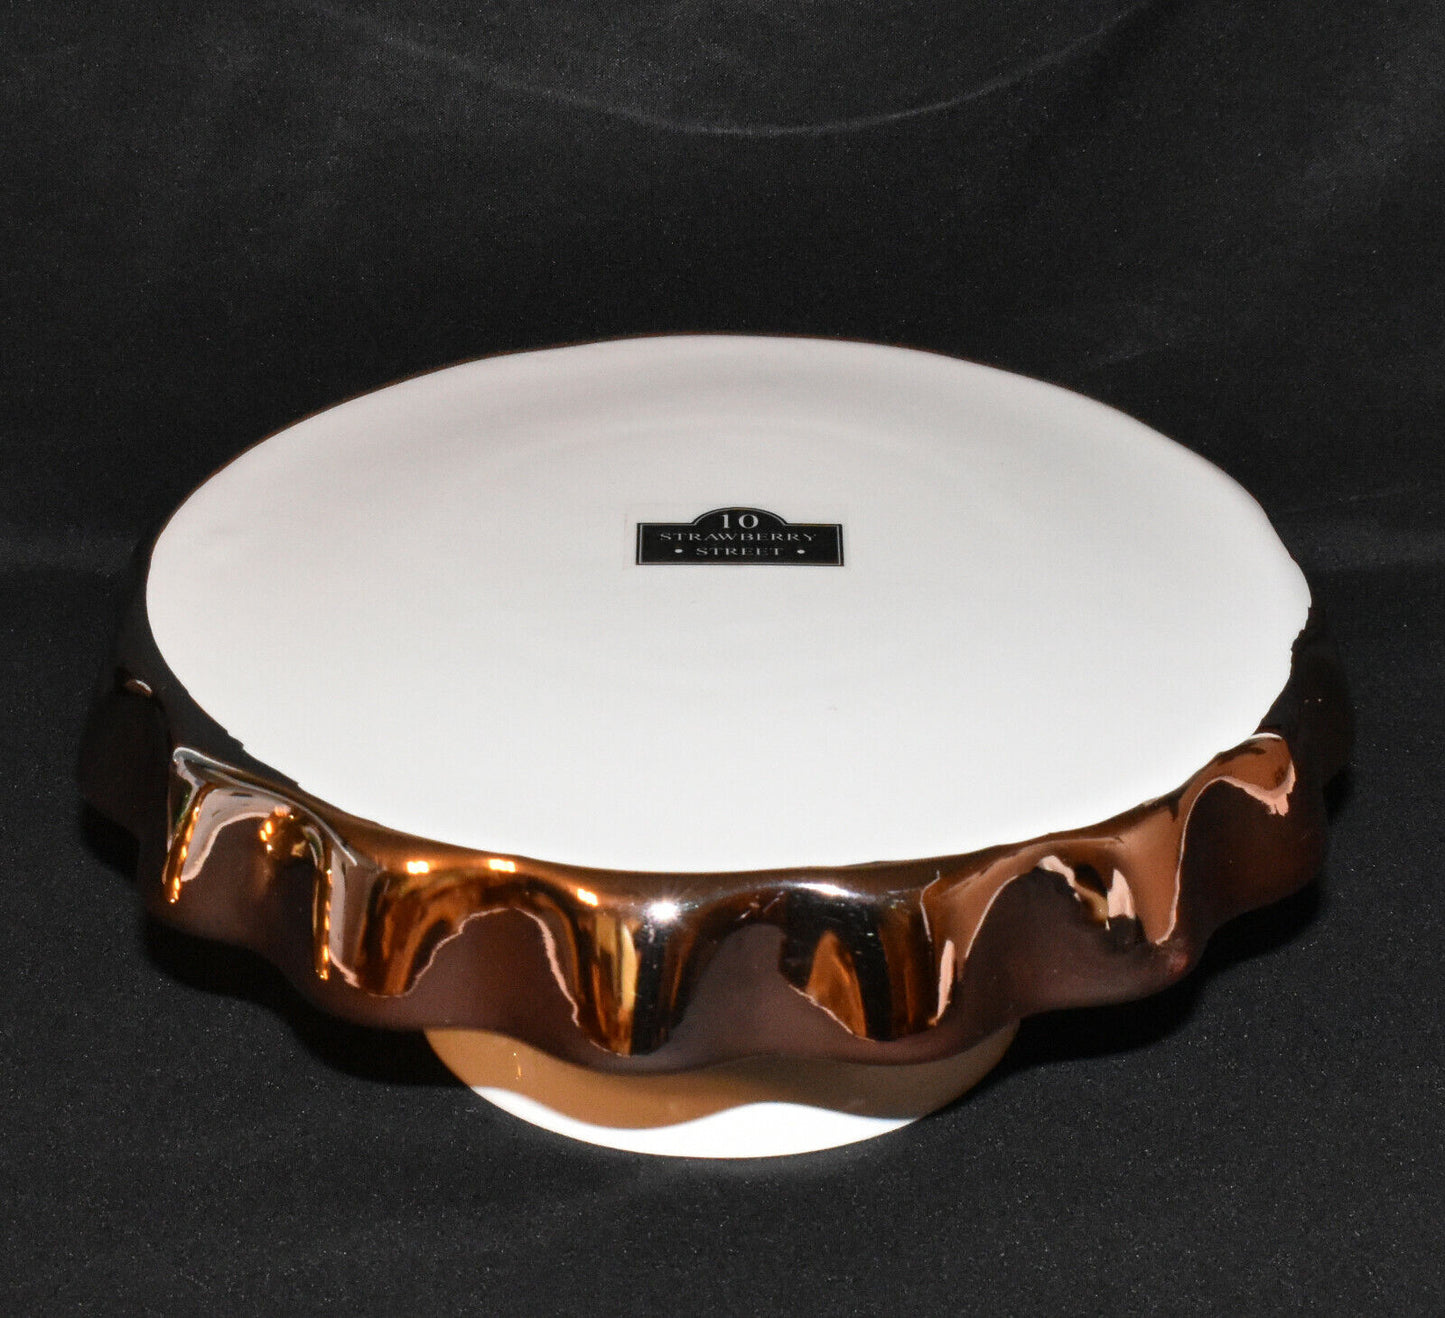 Skirted Cake Stand Plate White & Rose Gold 10 Strawberry Street Pedestal Stand